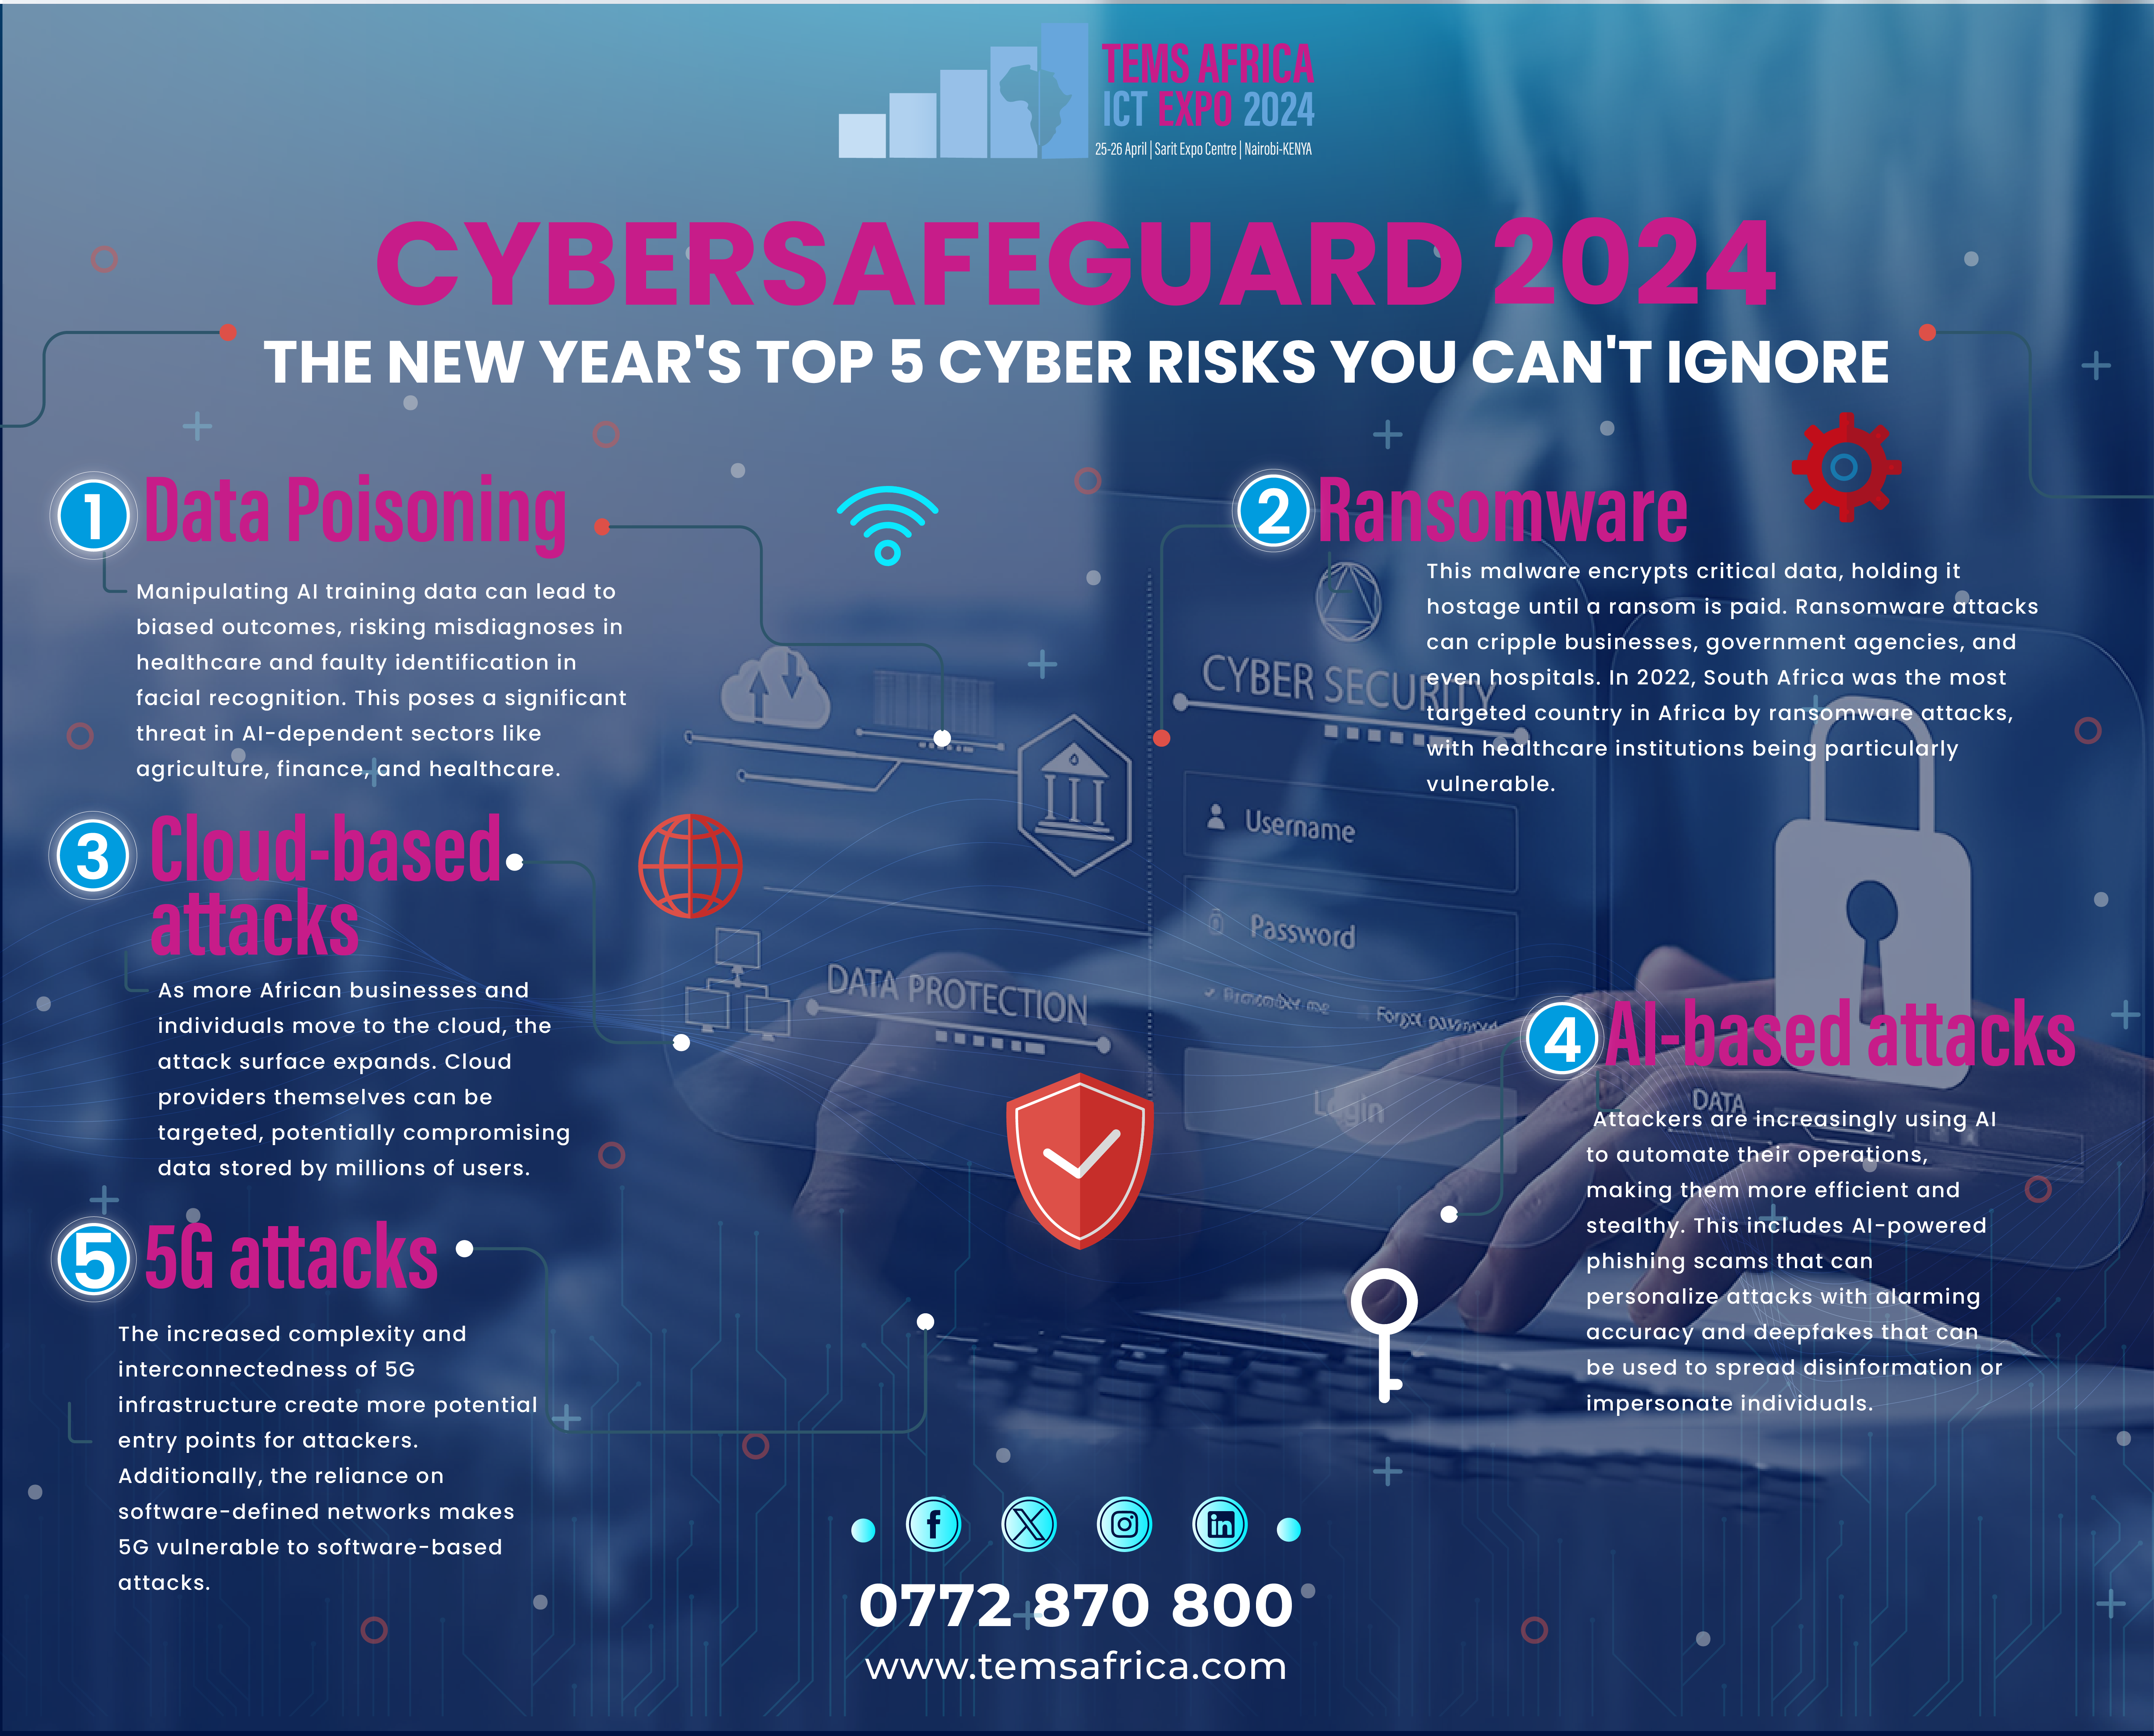 Top 5 Cybersecurity Risks/ Attacks of 2024